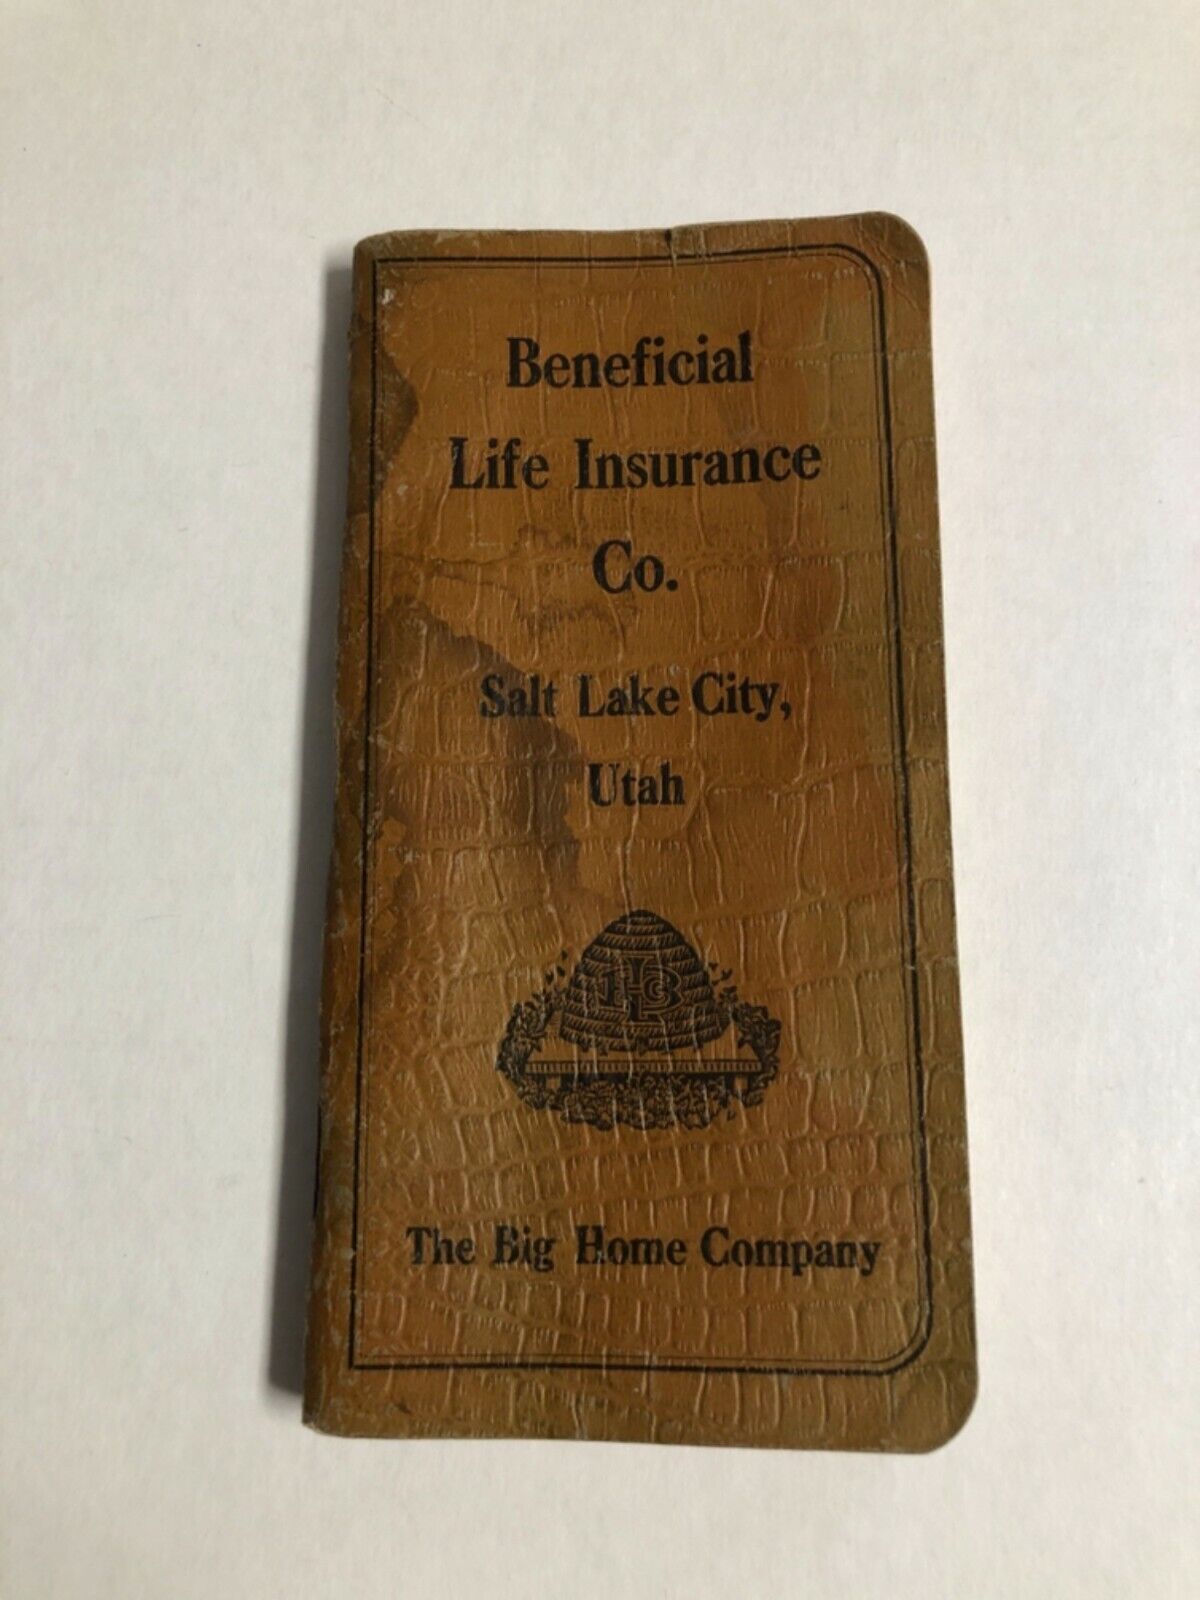 1930 Beneficial Life Insurance Co. Notebook - Unused - Vintage